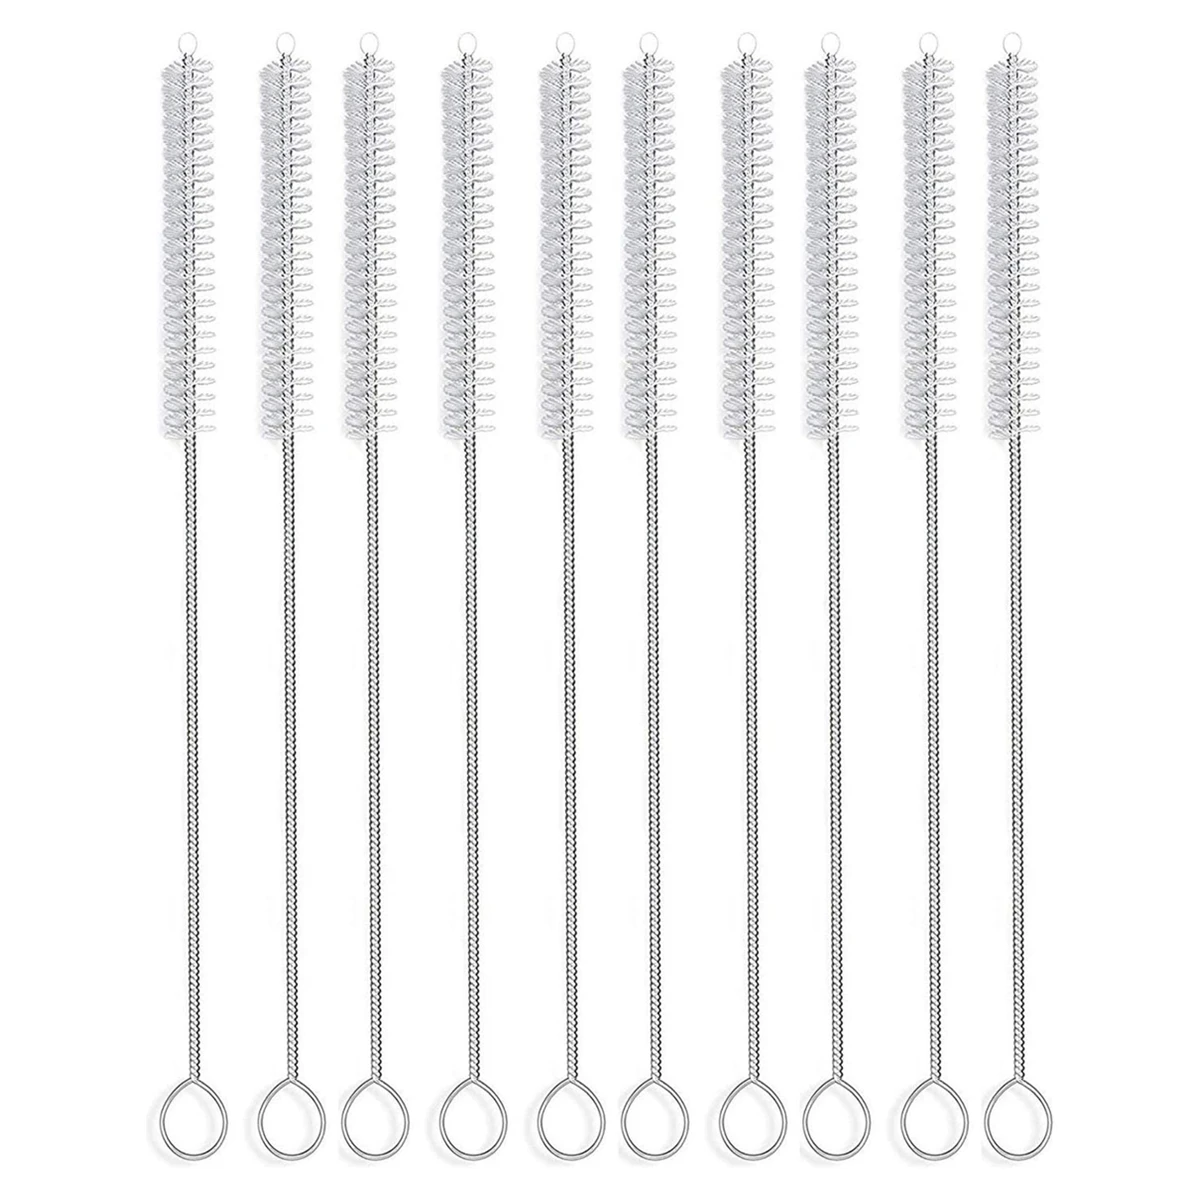 https://ae01.alicdn.com/kf/Sce29f95d4064462a83161d8eb795c1e9E/20-5Pcs-Drinking-Straw-Cleaning-Brush-Nipple-Tube-Pipe-Cleaner-Nylon-Stainless-Steel-Long-Handle-Cleaning.jpg